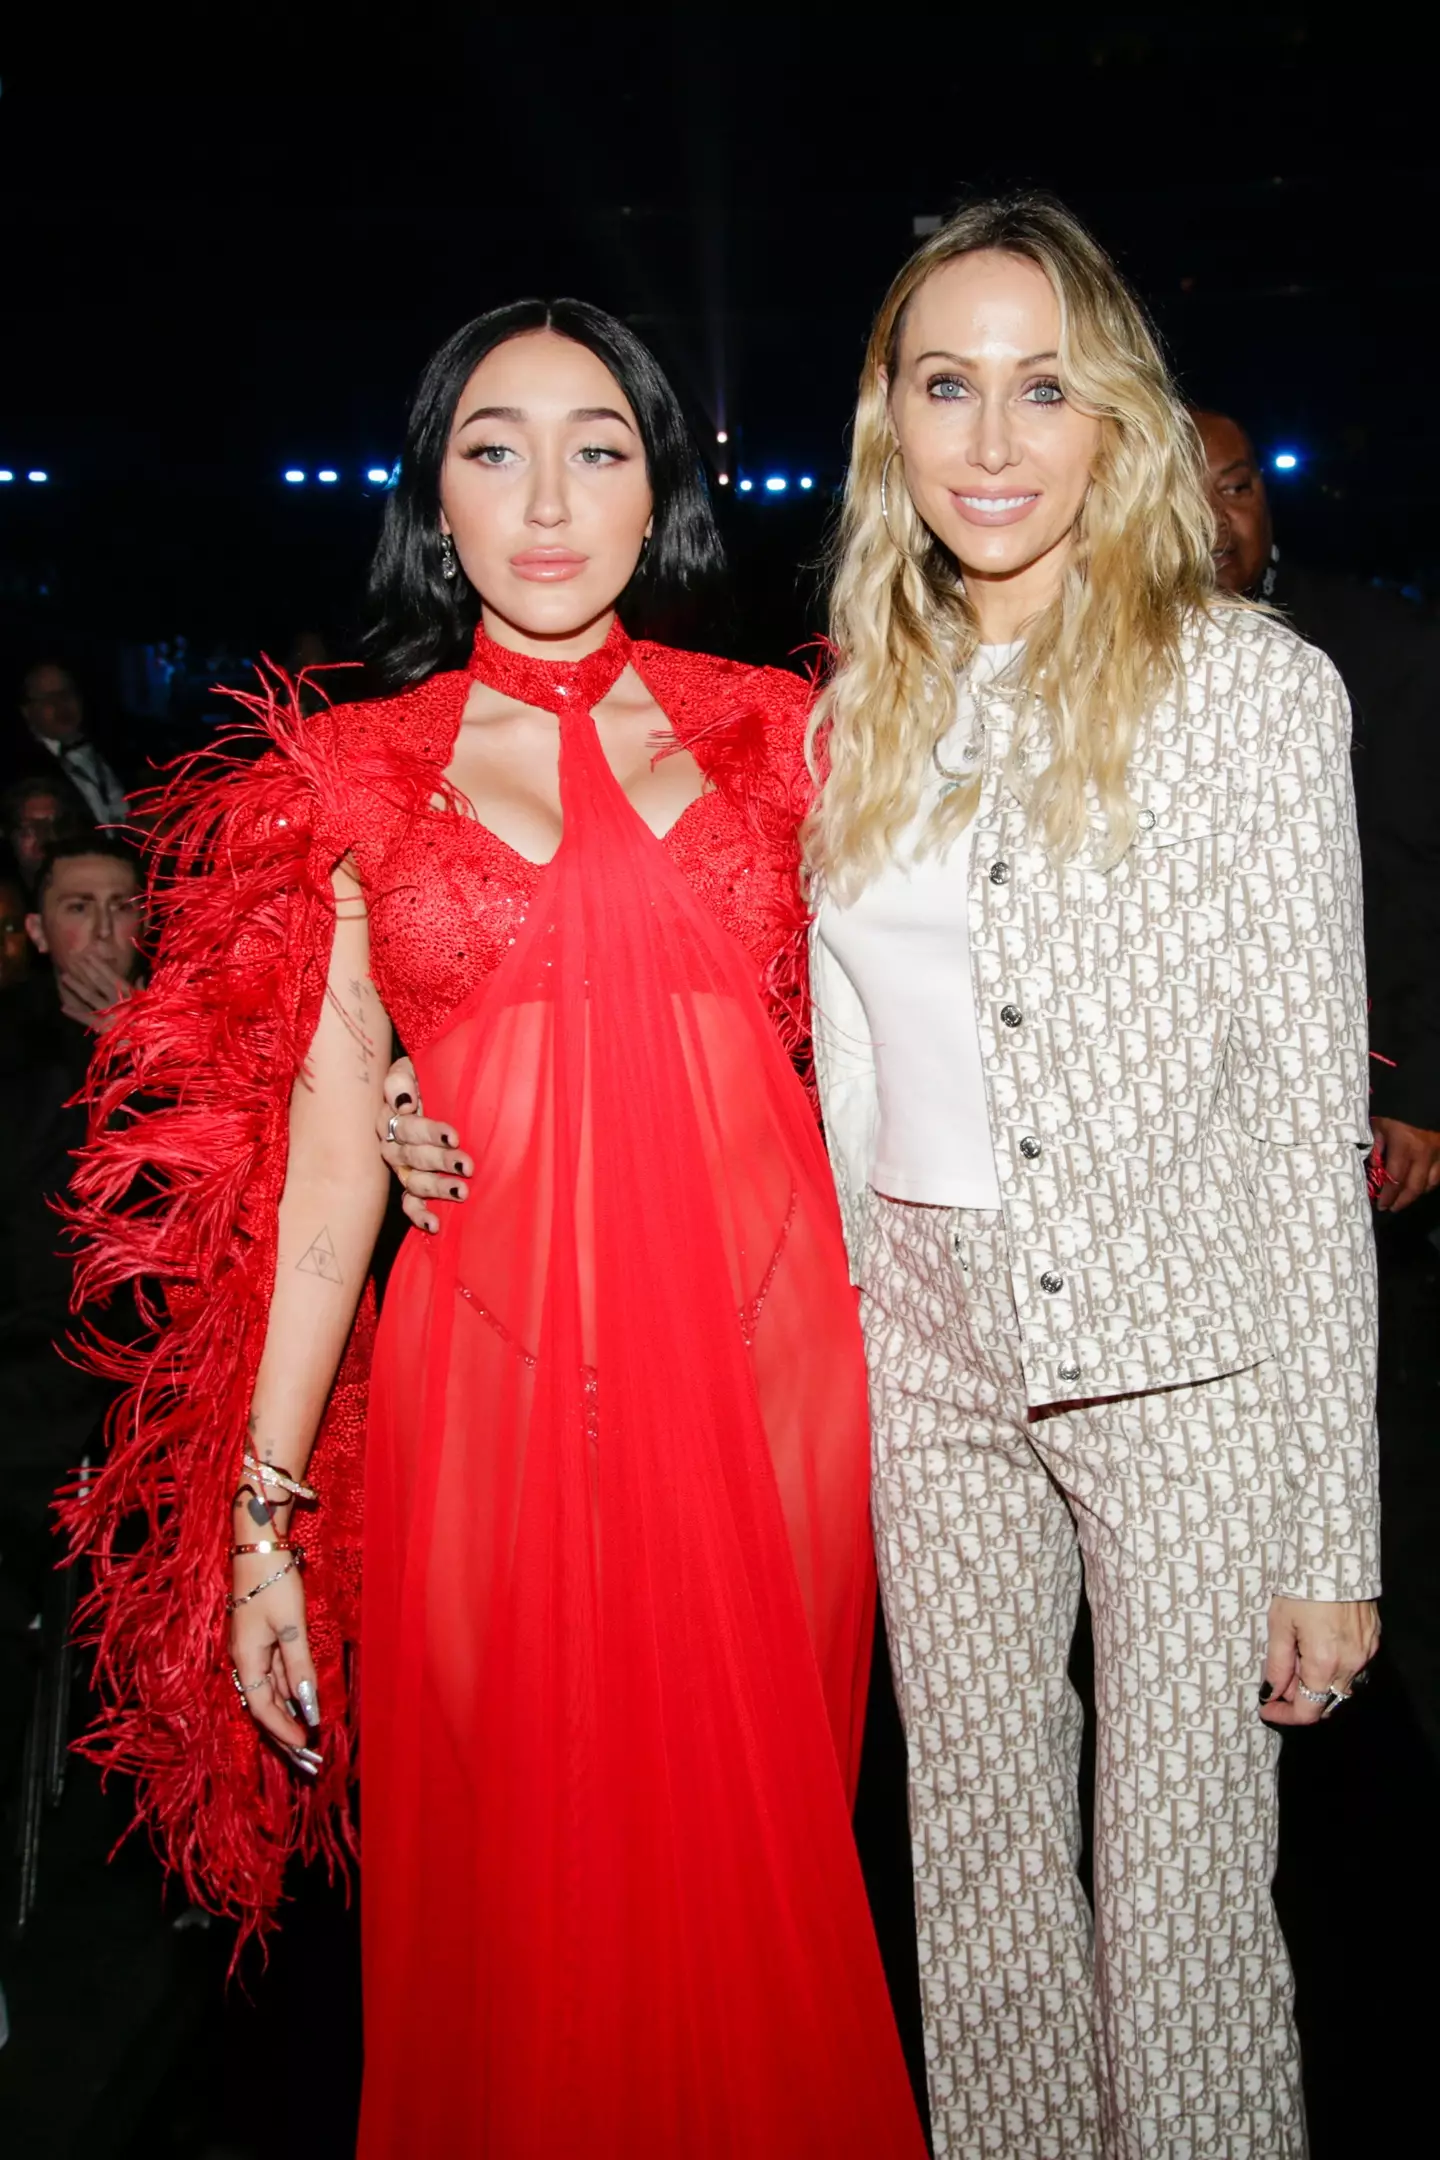 Tish and Noah Cyrus seen at the 62nd Annual Grammy Awards.